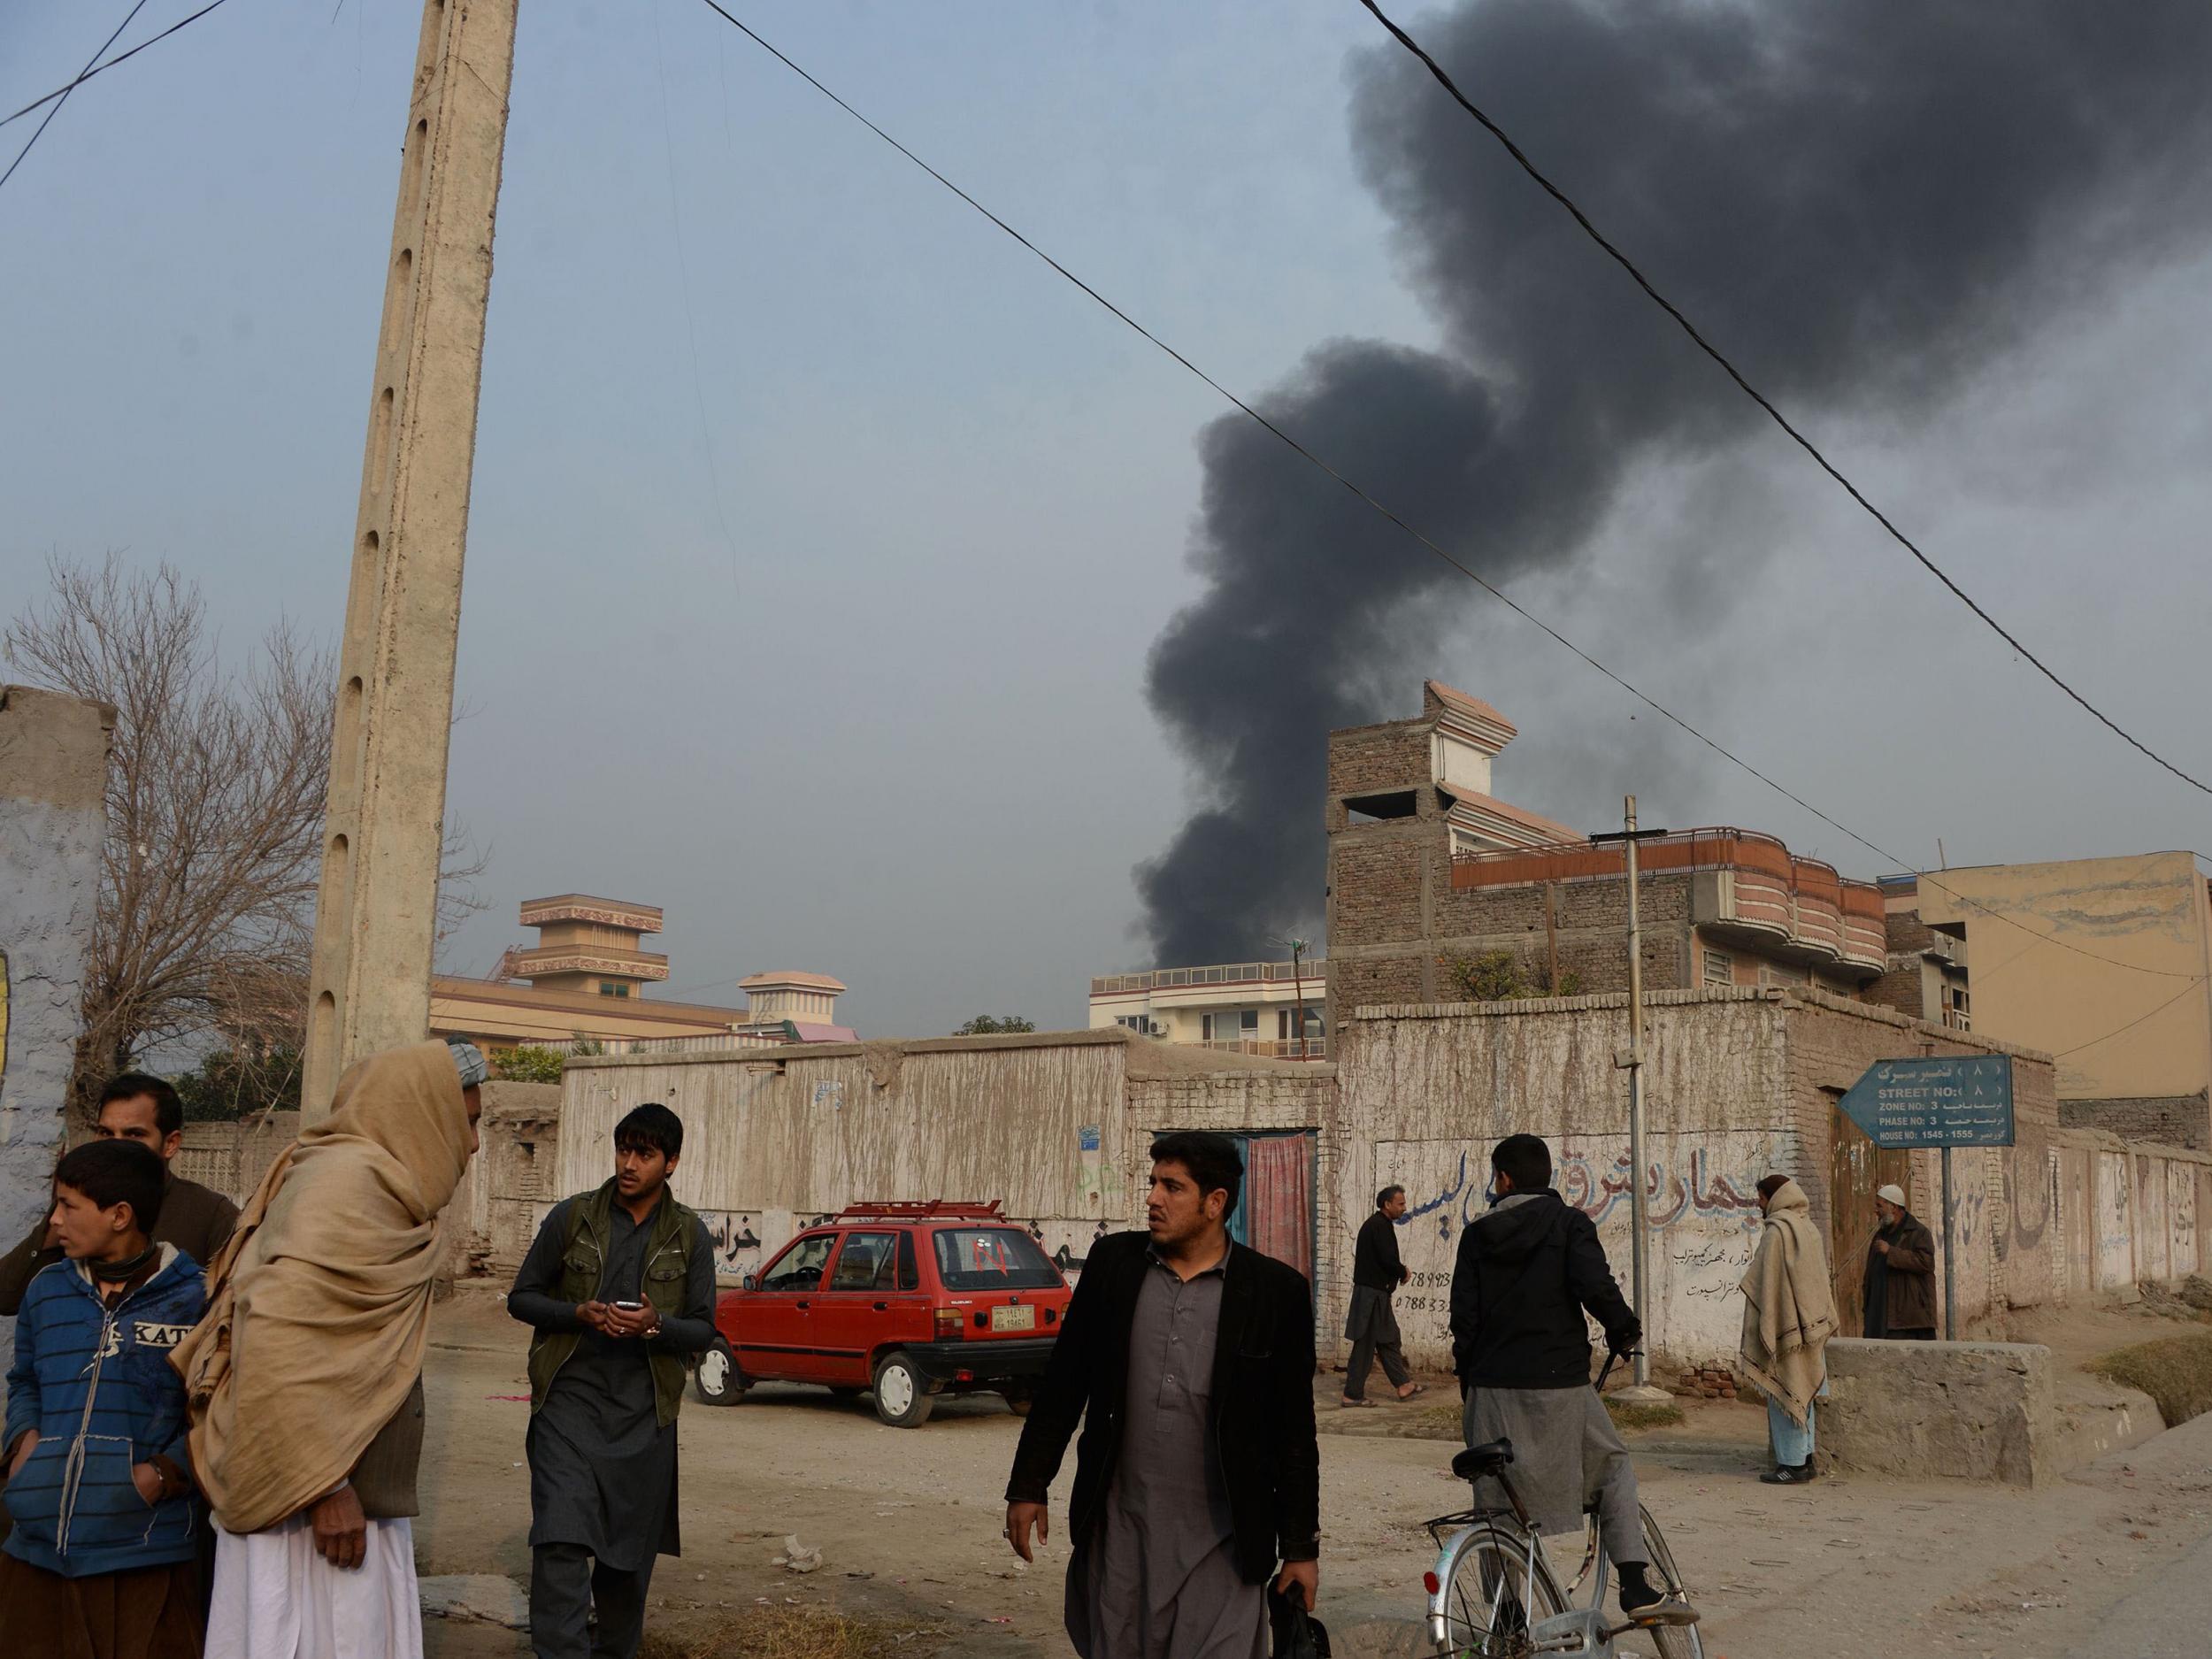 Afghan civilians gather on a street next to a plume of smoke coming from the area around an office of the British charity Save the Children during an ongoing attack in Jalalabad on 24 January 2018